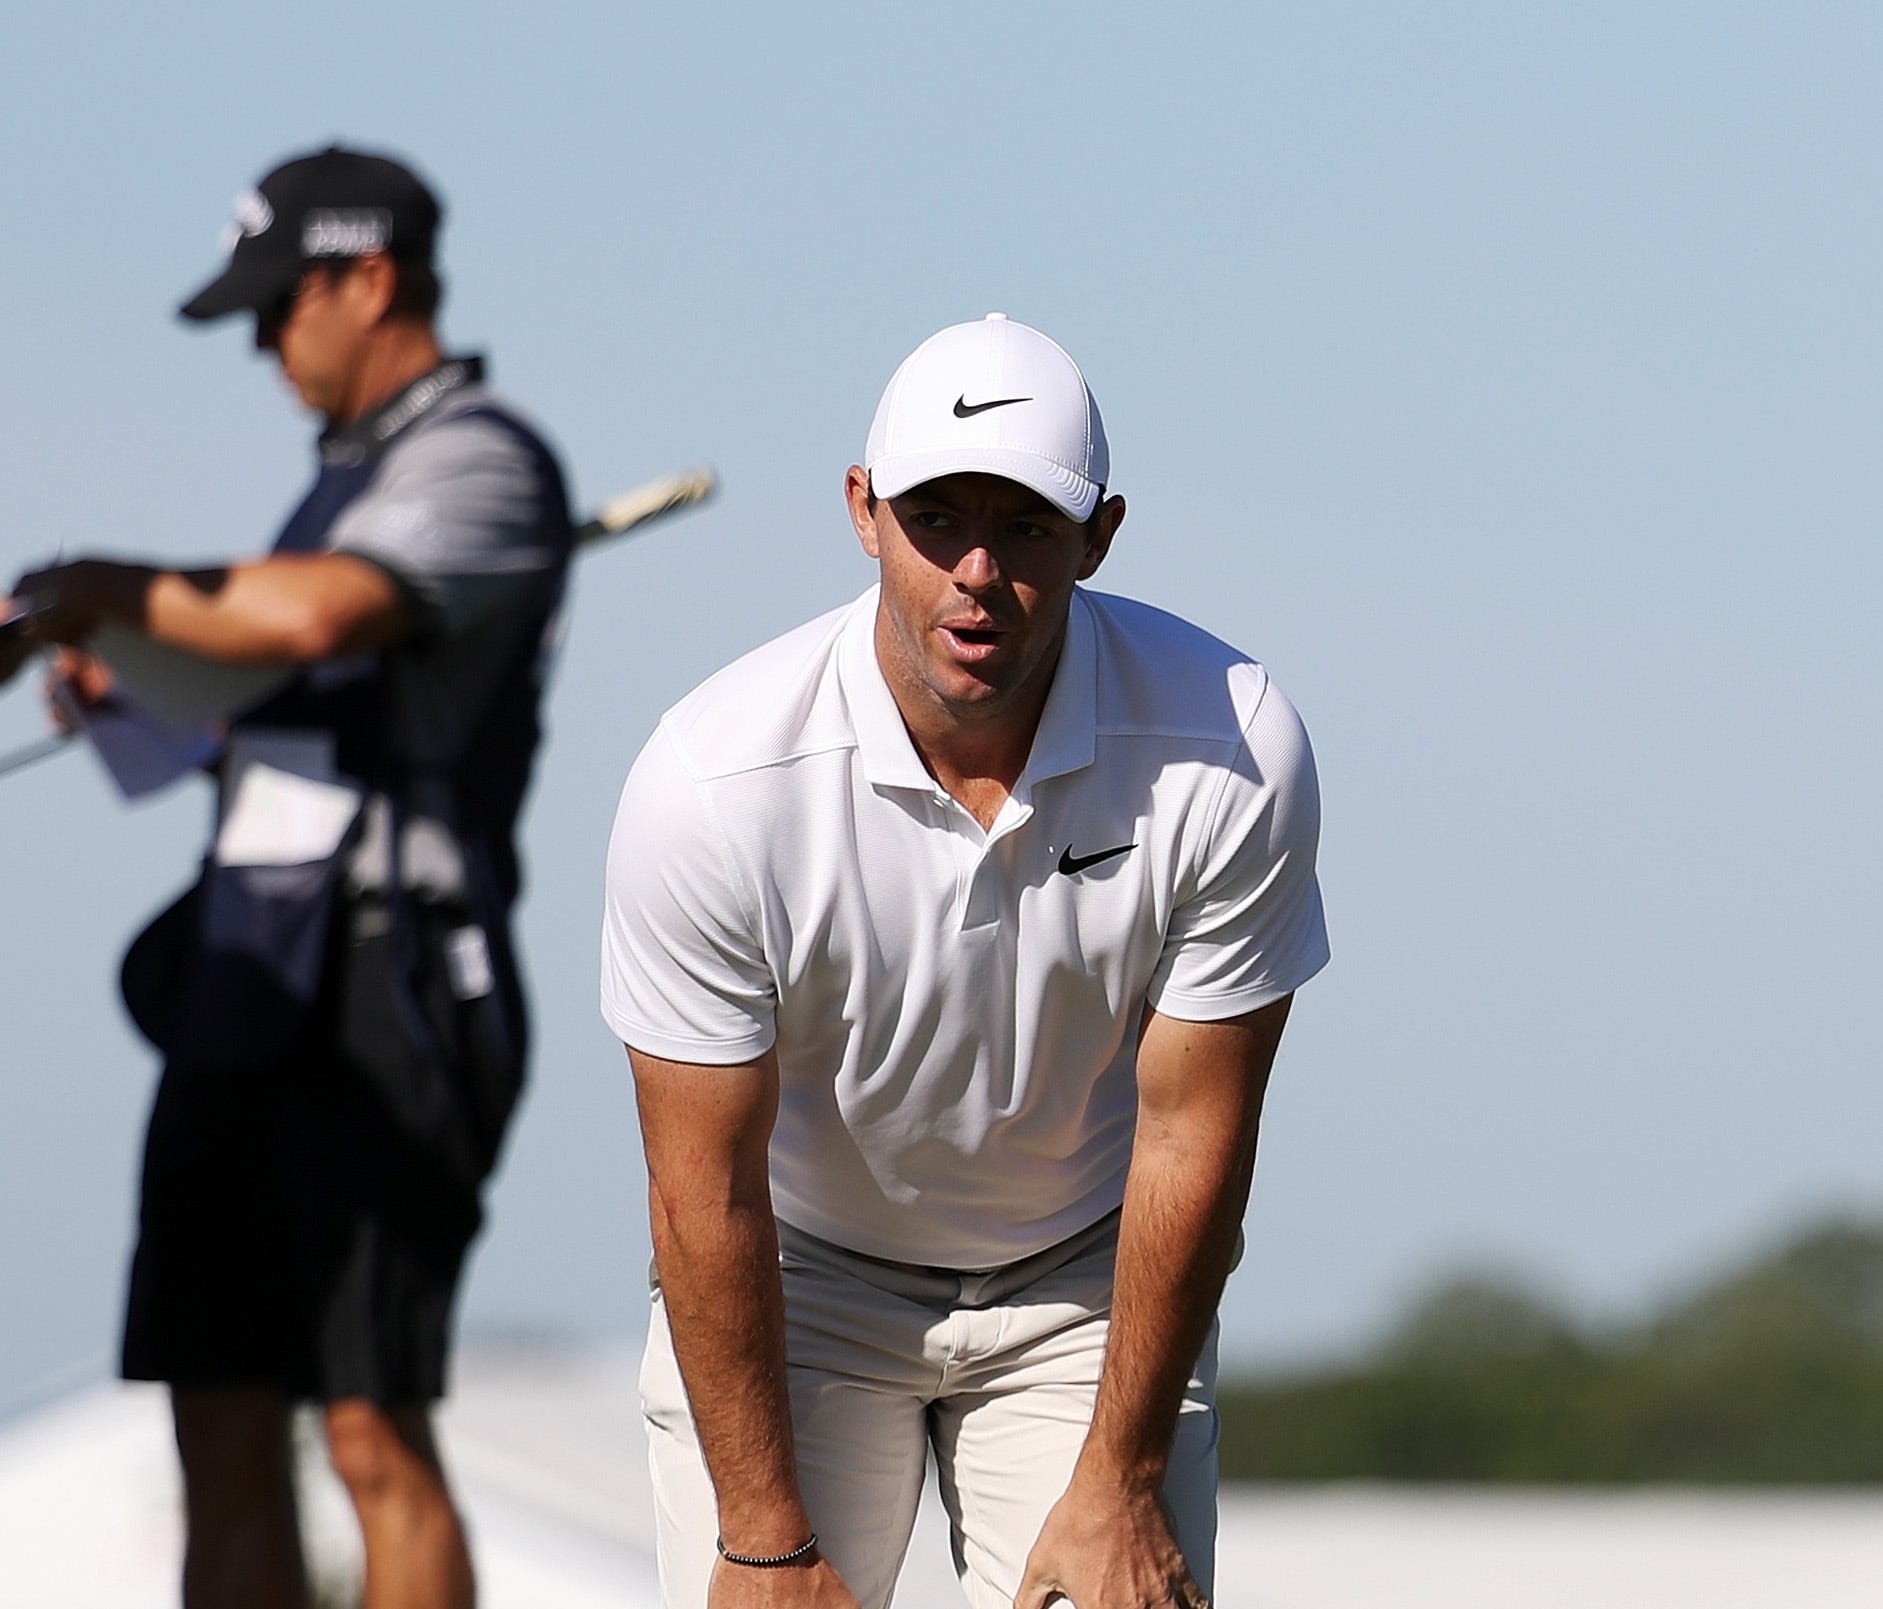 : Rory McIlroy of Northern Ireland reacts to his birdie putt on the 11th hole during the first round of the 2018 U.S. Open at Shinnecock Hills Golf Club on June 14, 2018 in Southampton, New York.